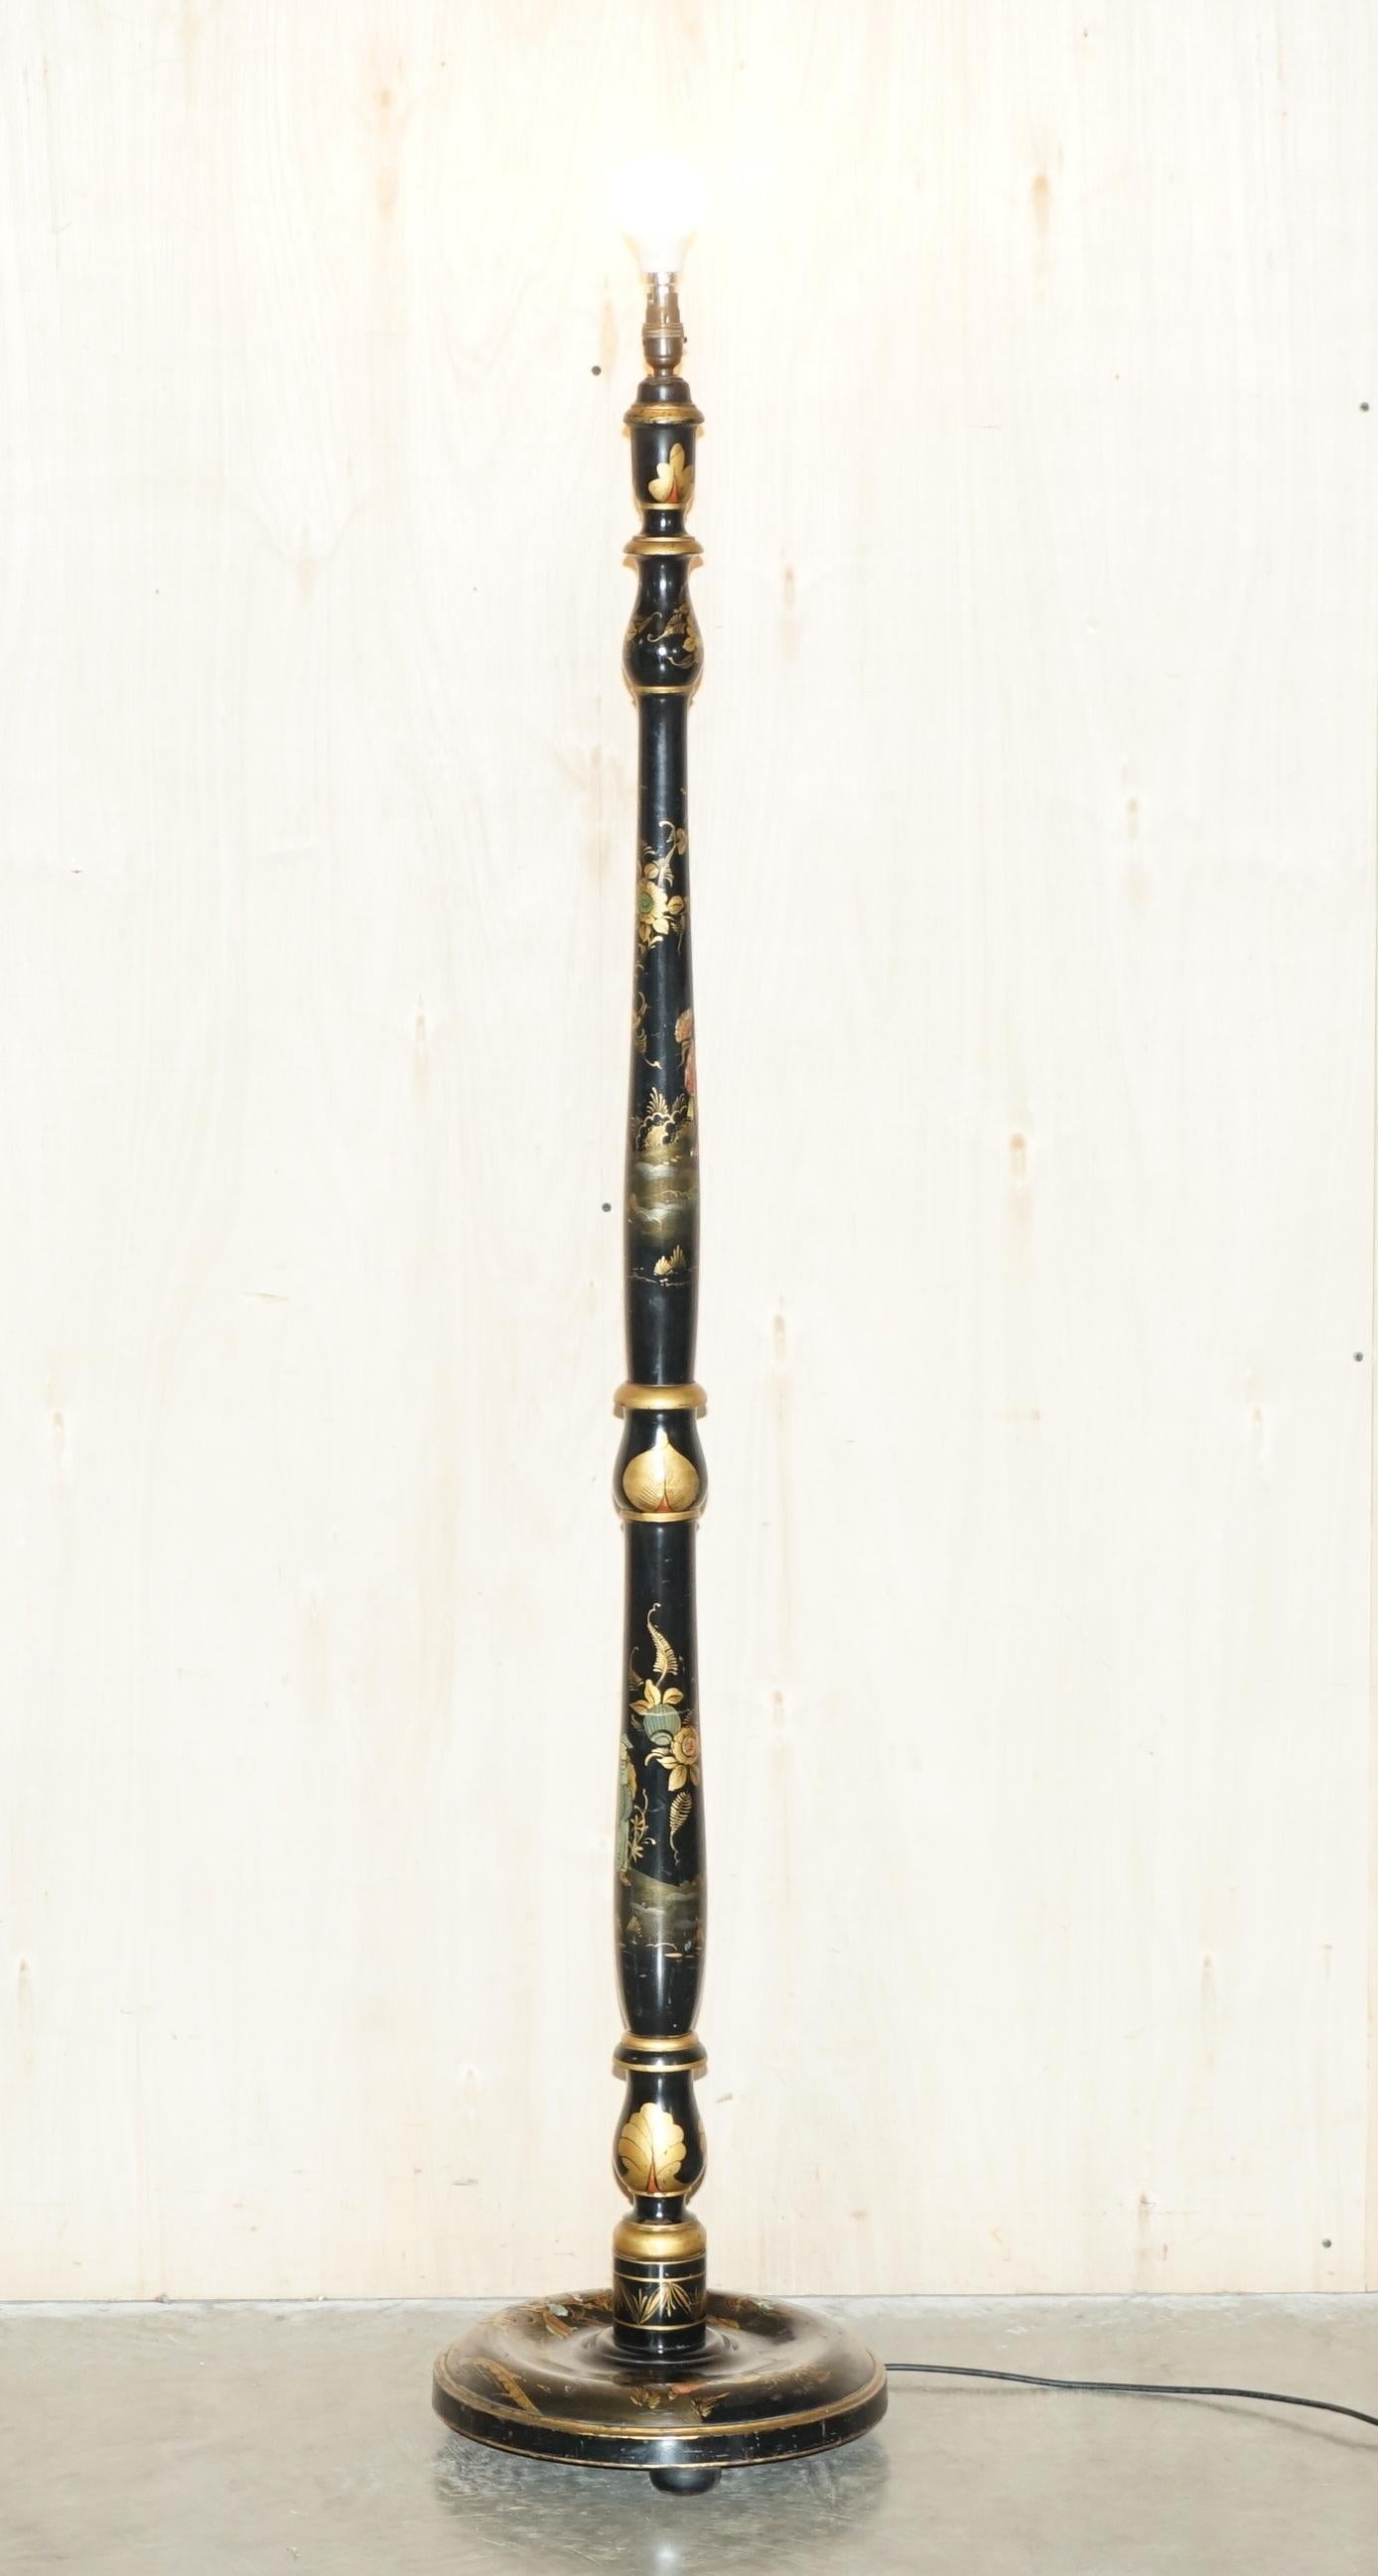 We are delighted to offer for sale this very rare hand painted and lacquered Chinese Export circa 1920's Chinoiserie floor standing lamp

I have two of these with slightly different finishes, the other is listed under my other items 

The lamp